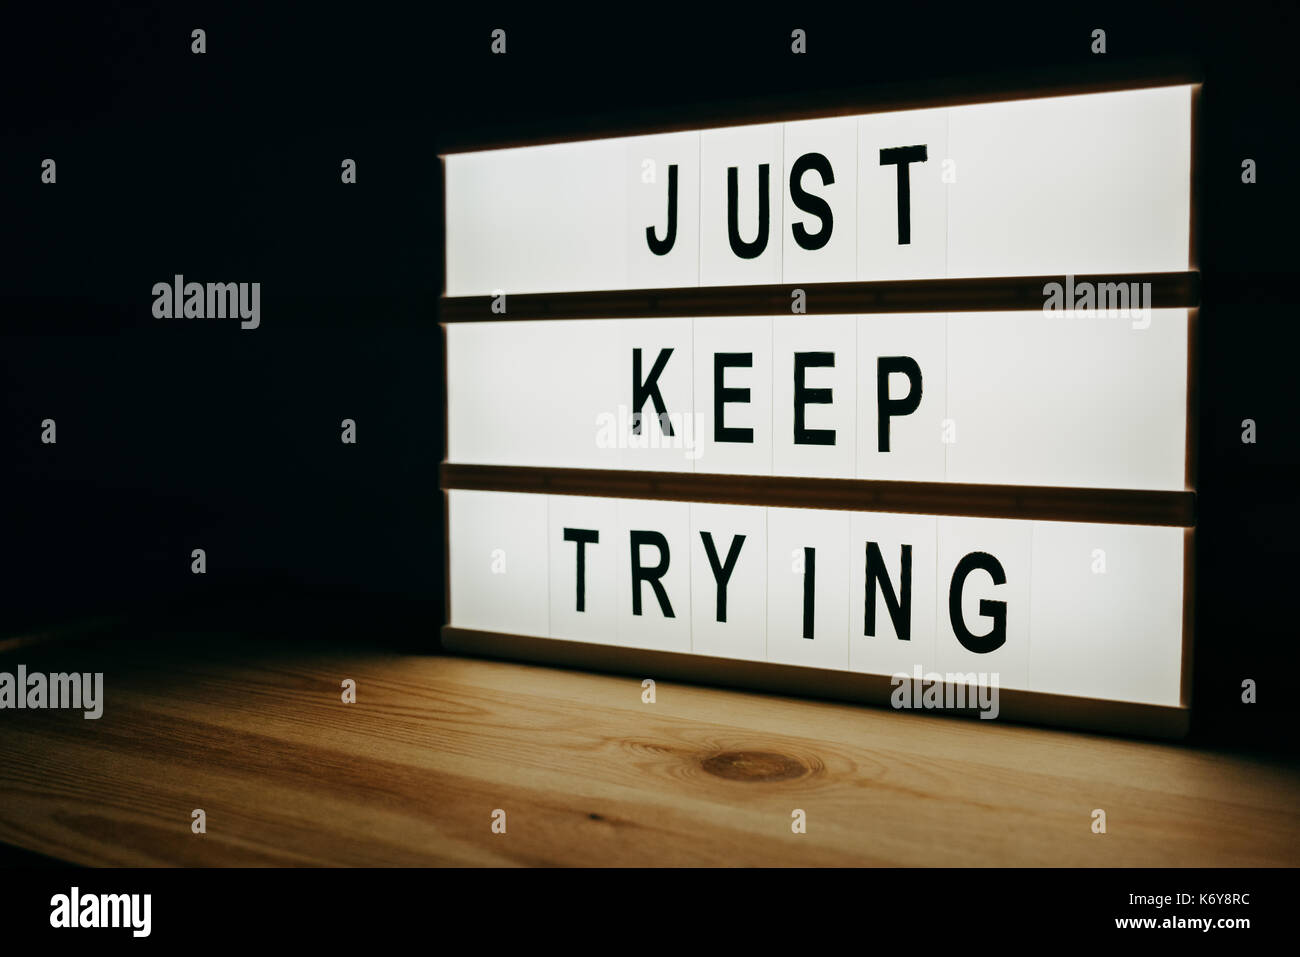 Just keep trying, motivational message on lightbox Stock Photo